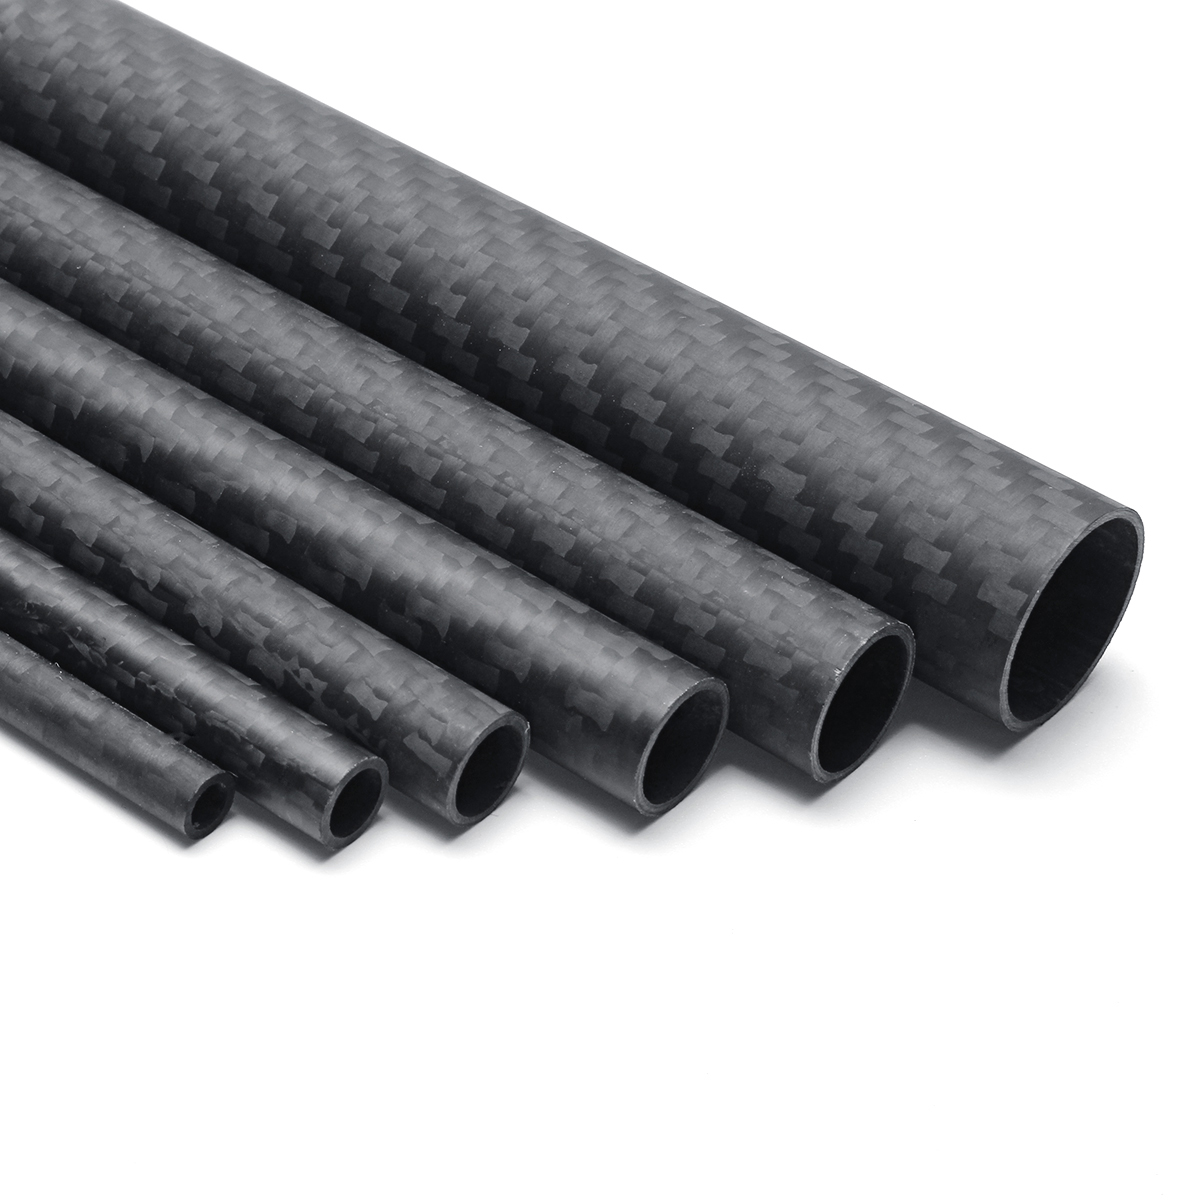 

500mm Carbon Fiber Tube From 5mm Up to 20mm Roll Wrapped-Glossy 3K